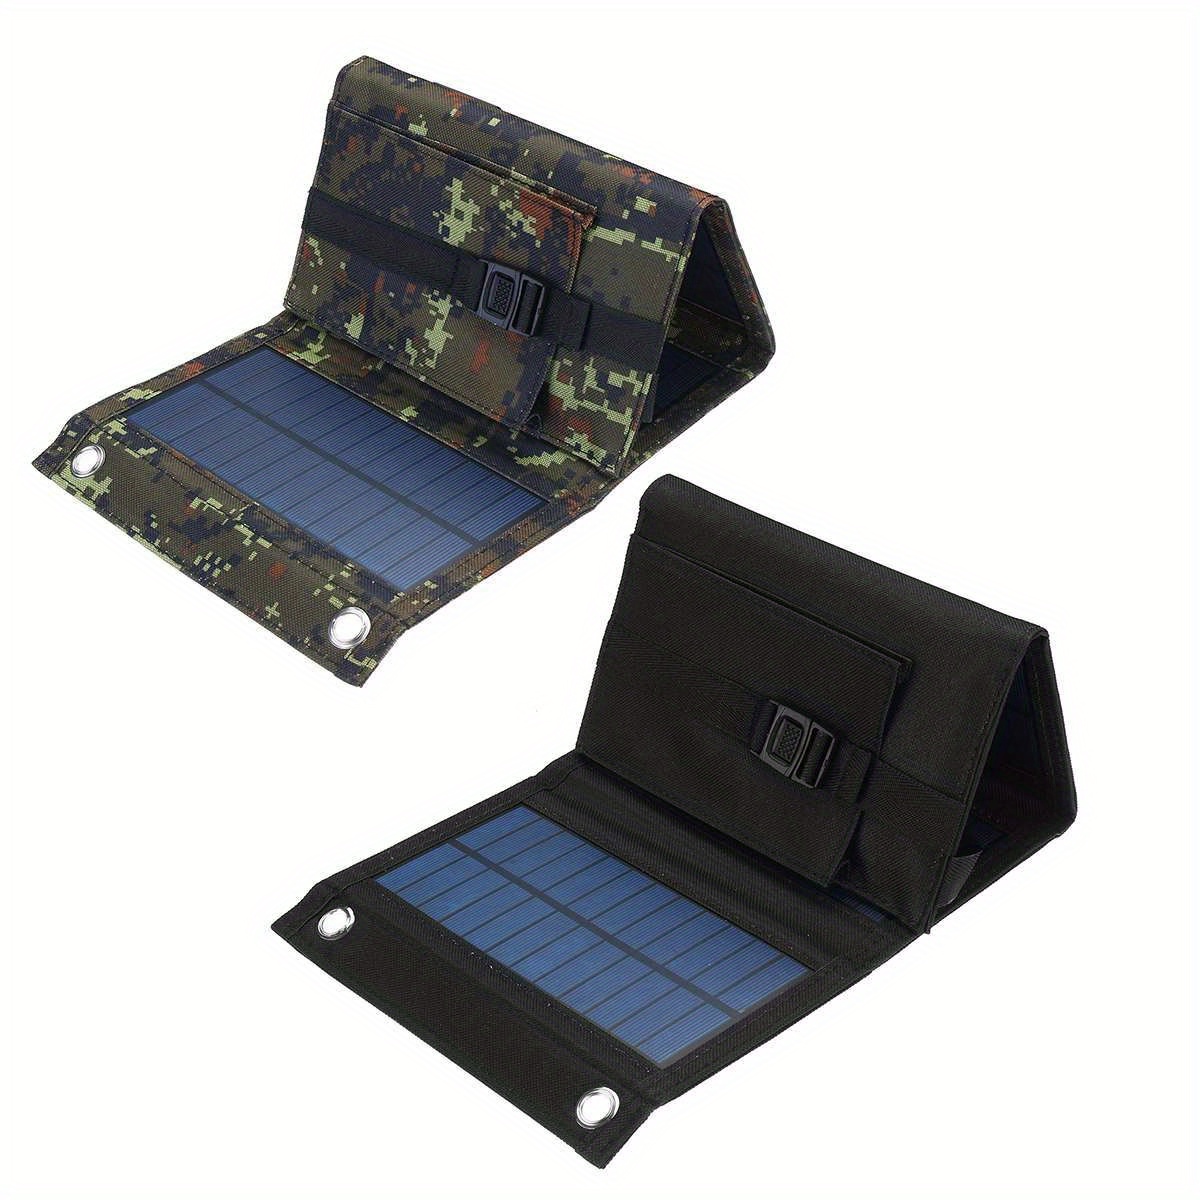 1pc waterproof solar panels portable foldable dual 5v usb solar panel charger power bank for phone battery details 1